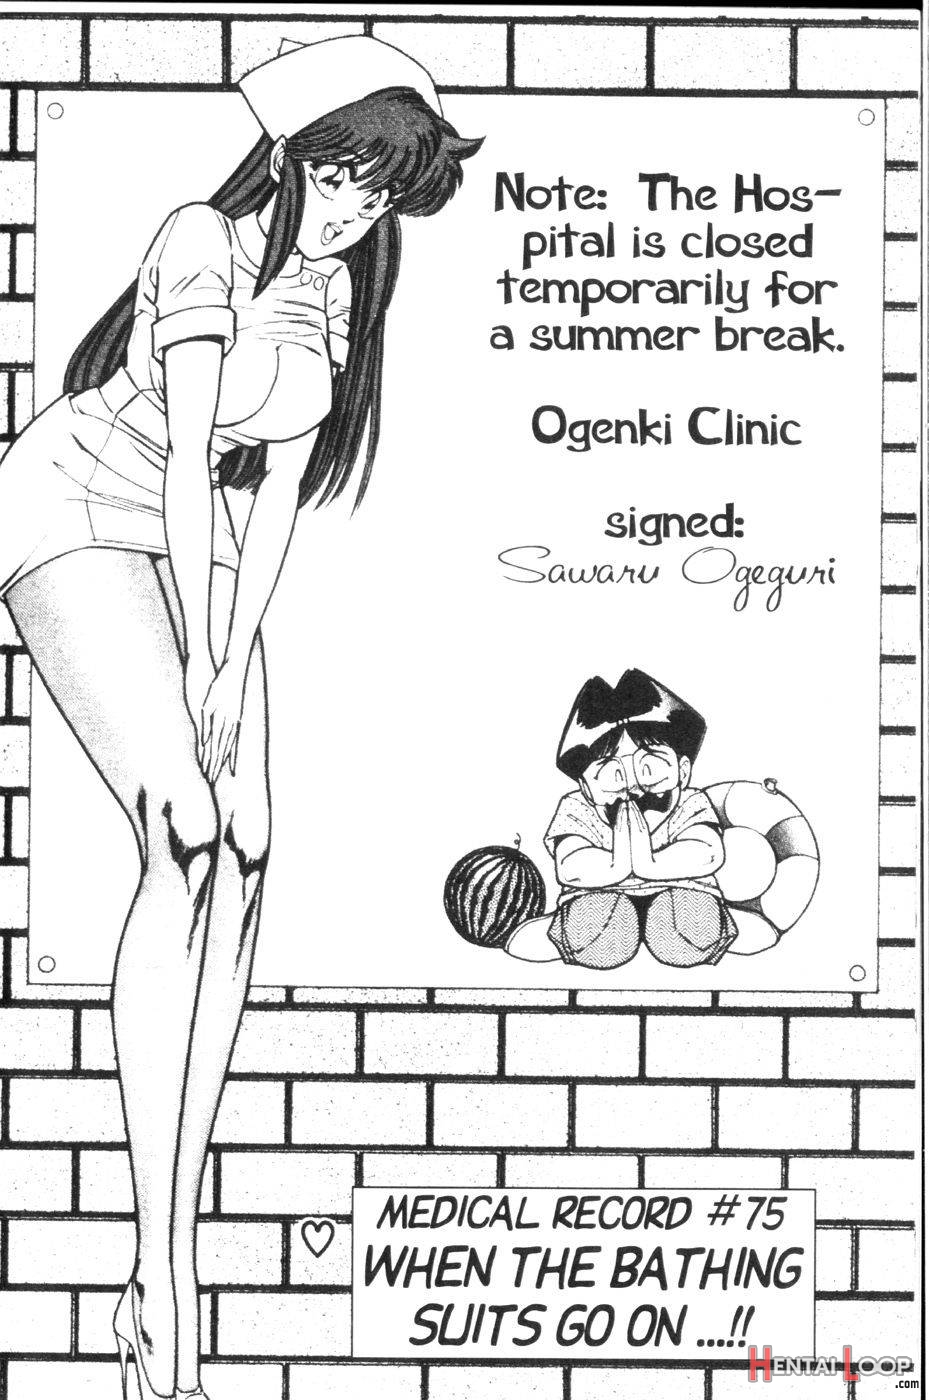 Ogenki Clinic Vol.6 page 76